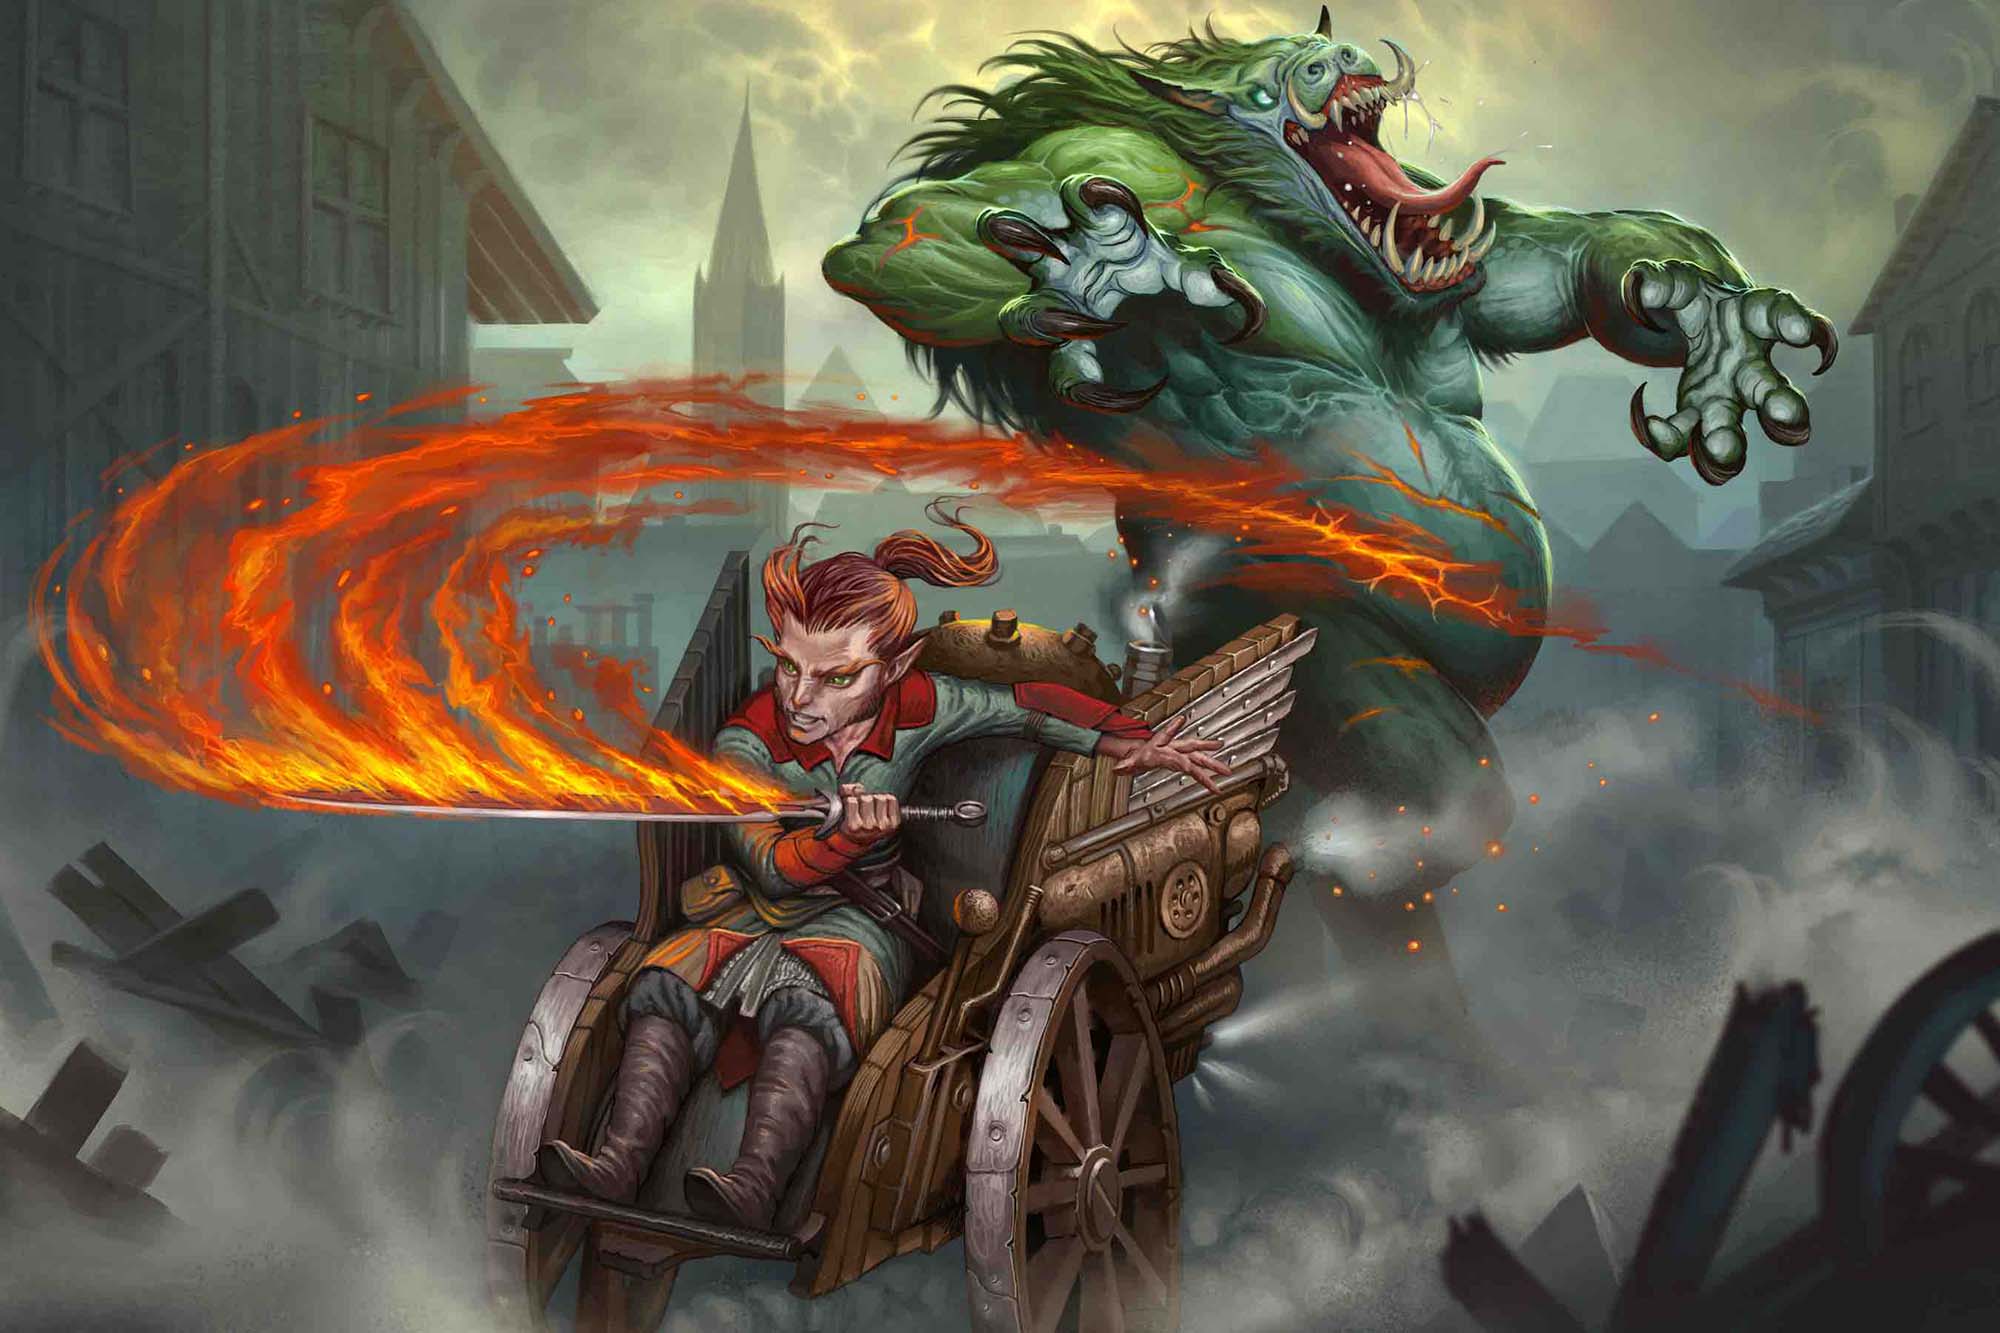 A red-haired gnome with a flaming sword steers his steam-powered wheelchair to swipe at a troll in the midst of some urban ruins.